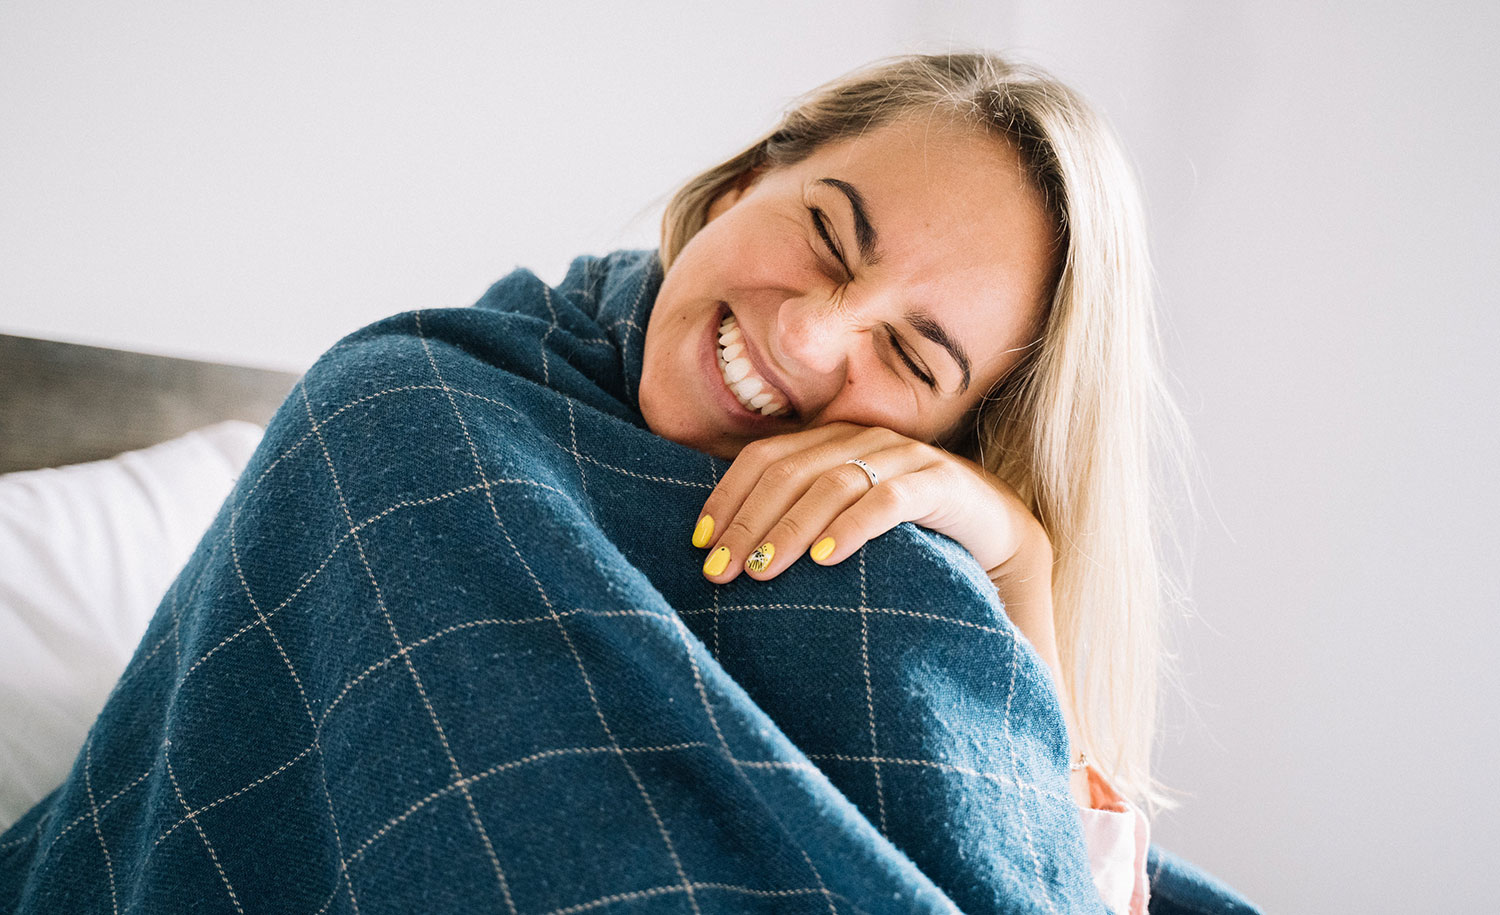 A happy highly sensitive woman cozied up in a blue blanket